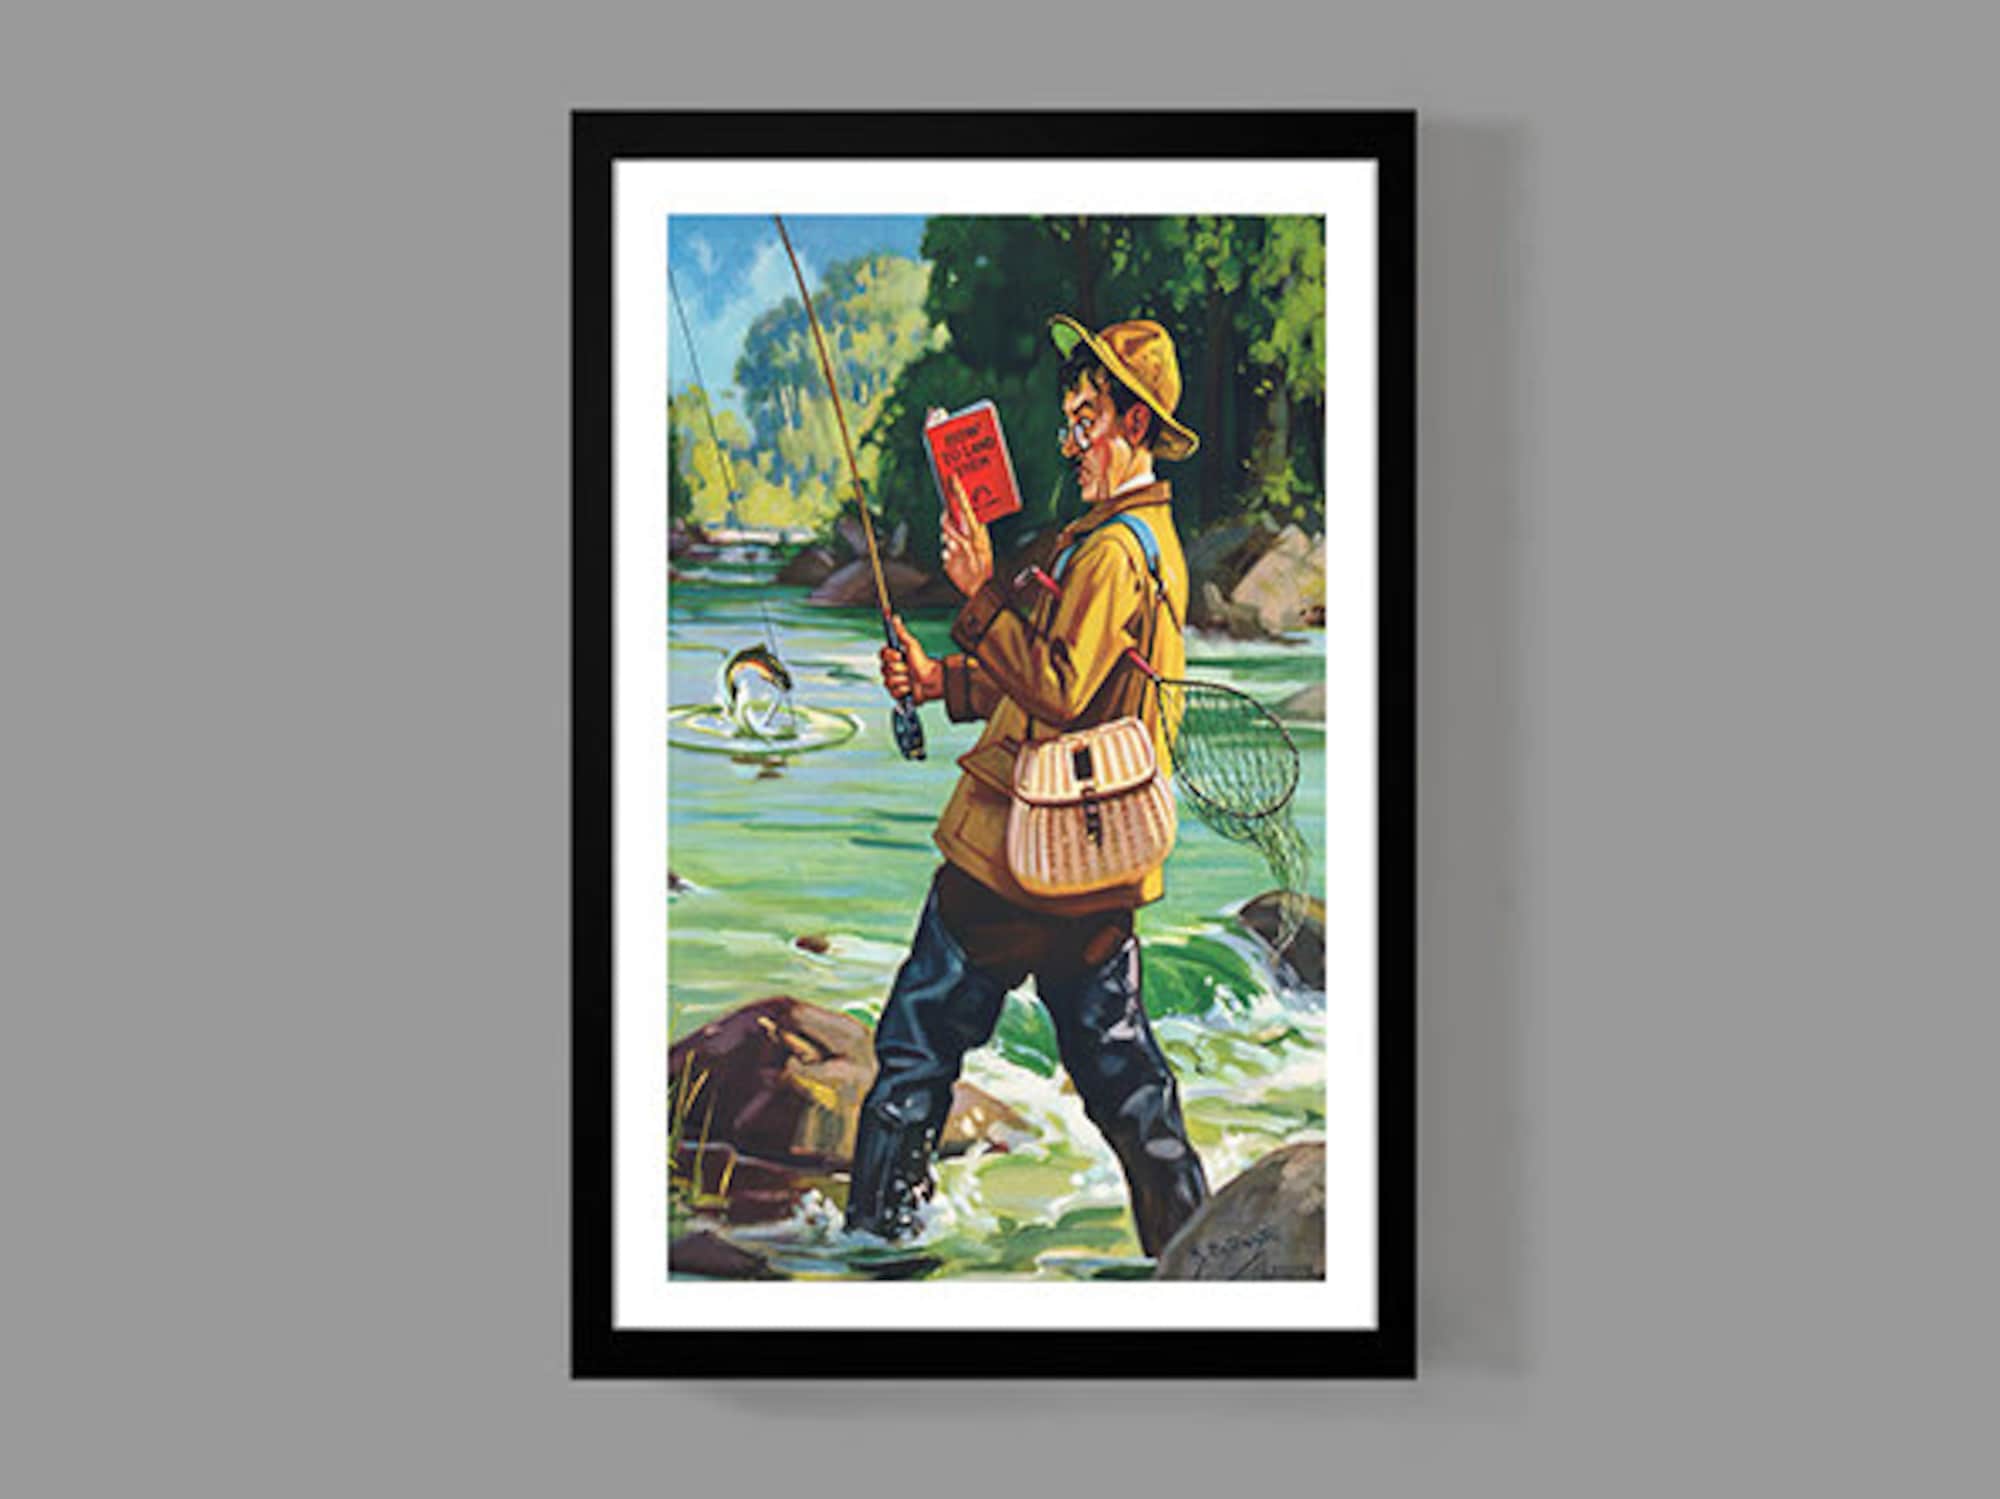 Discover Funny Vintage Fishing Poster - Funny Retro Fishing Print - Travel Poster, Sports